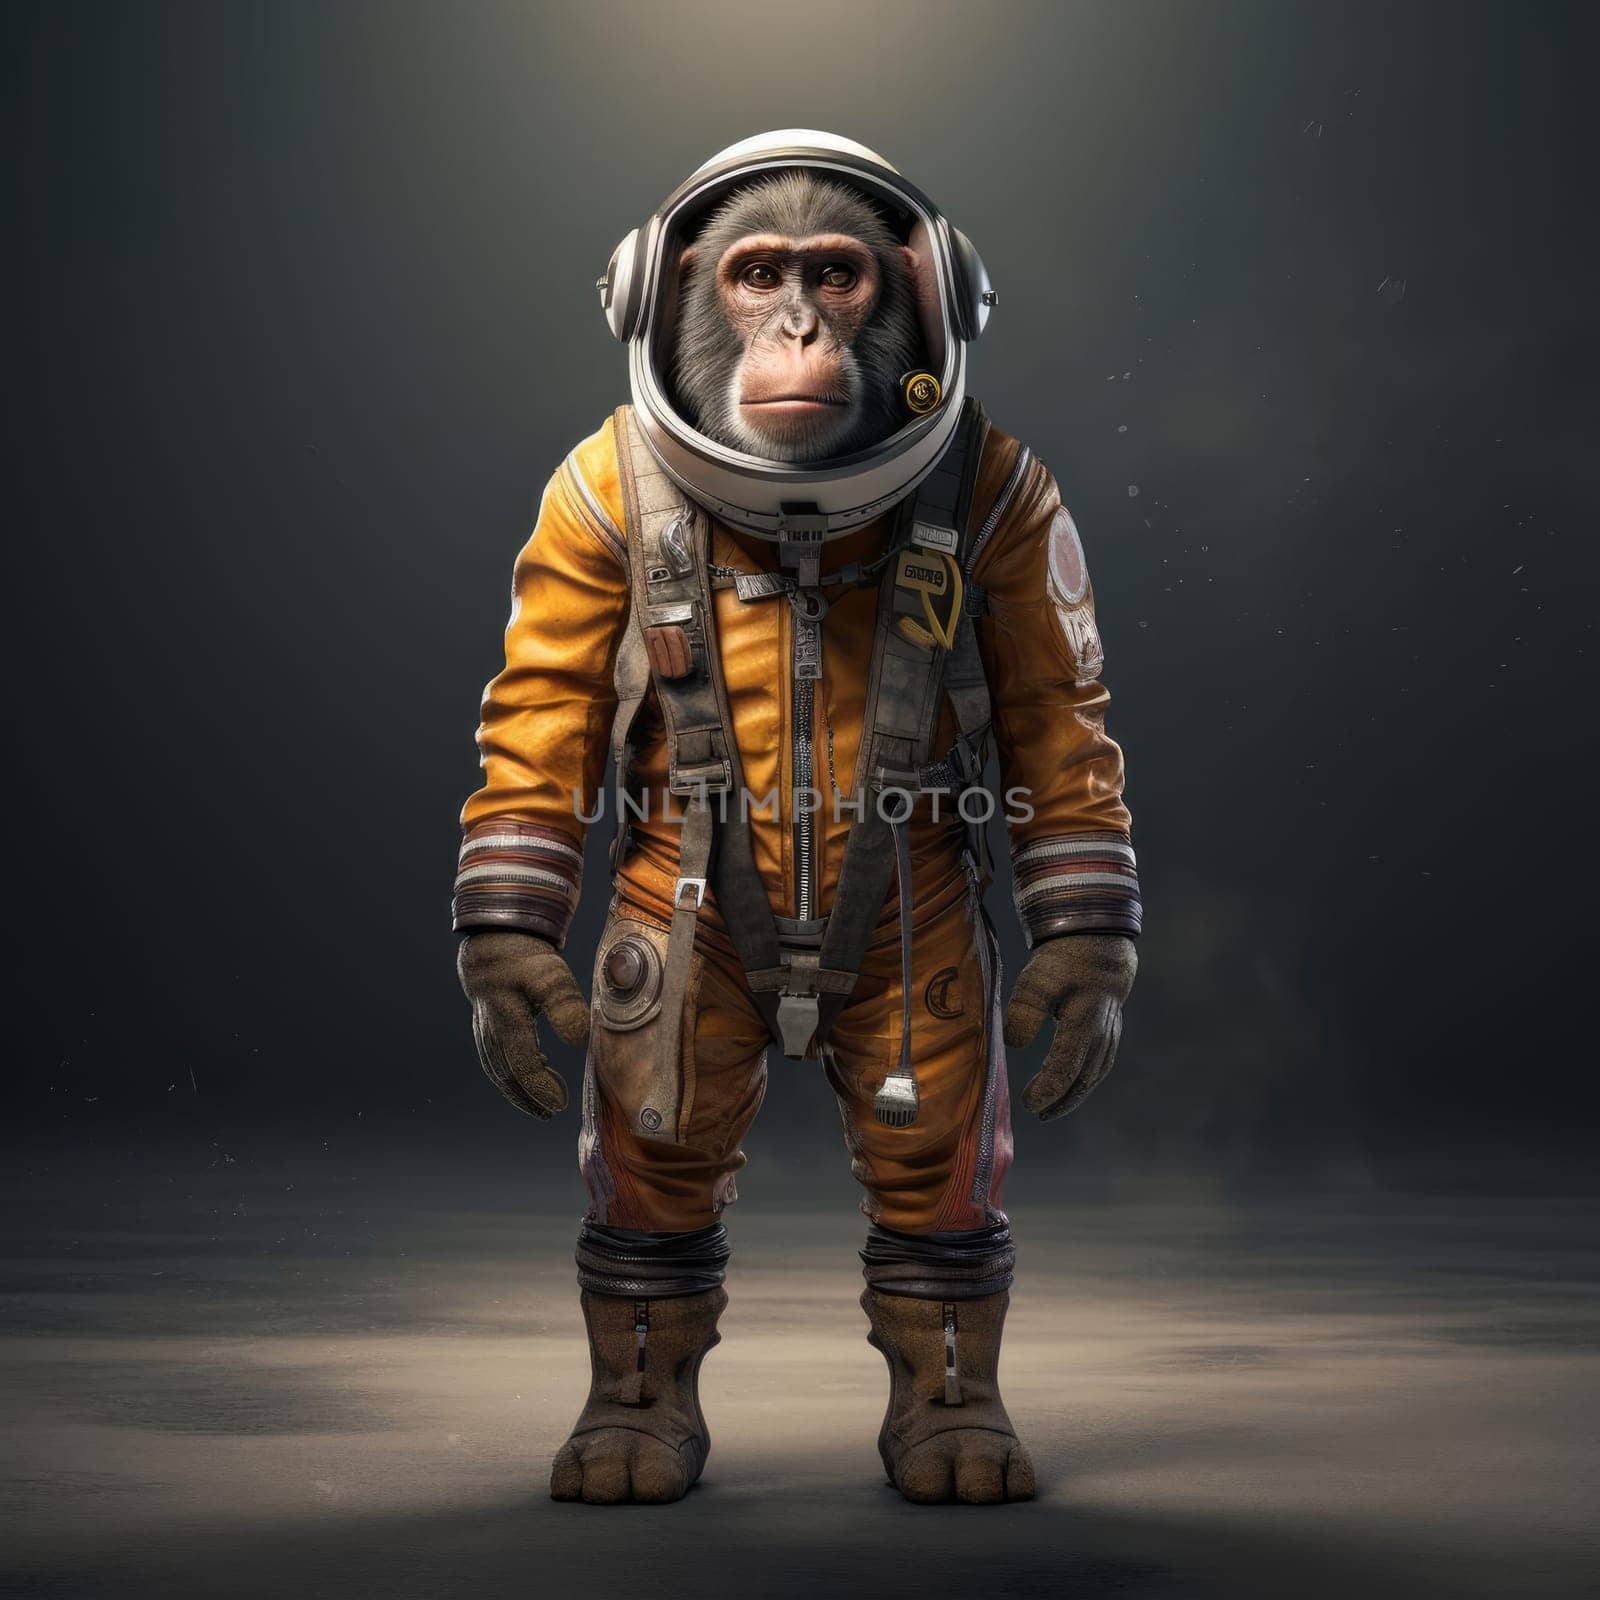 Monkey in space suit in space by cherezoff